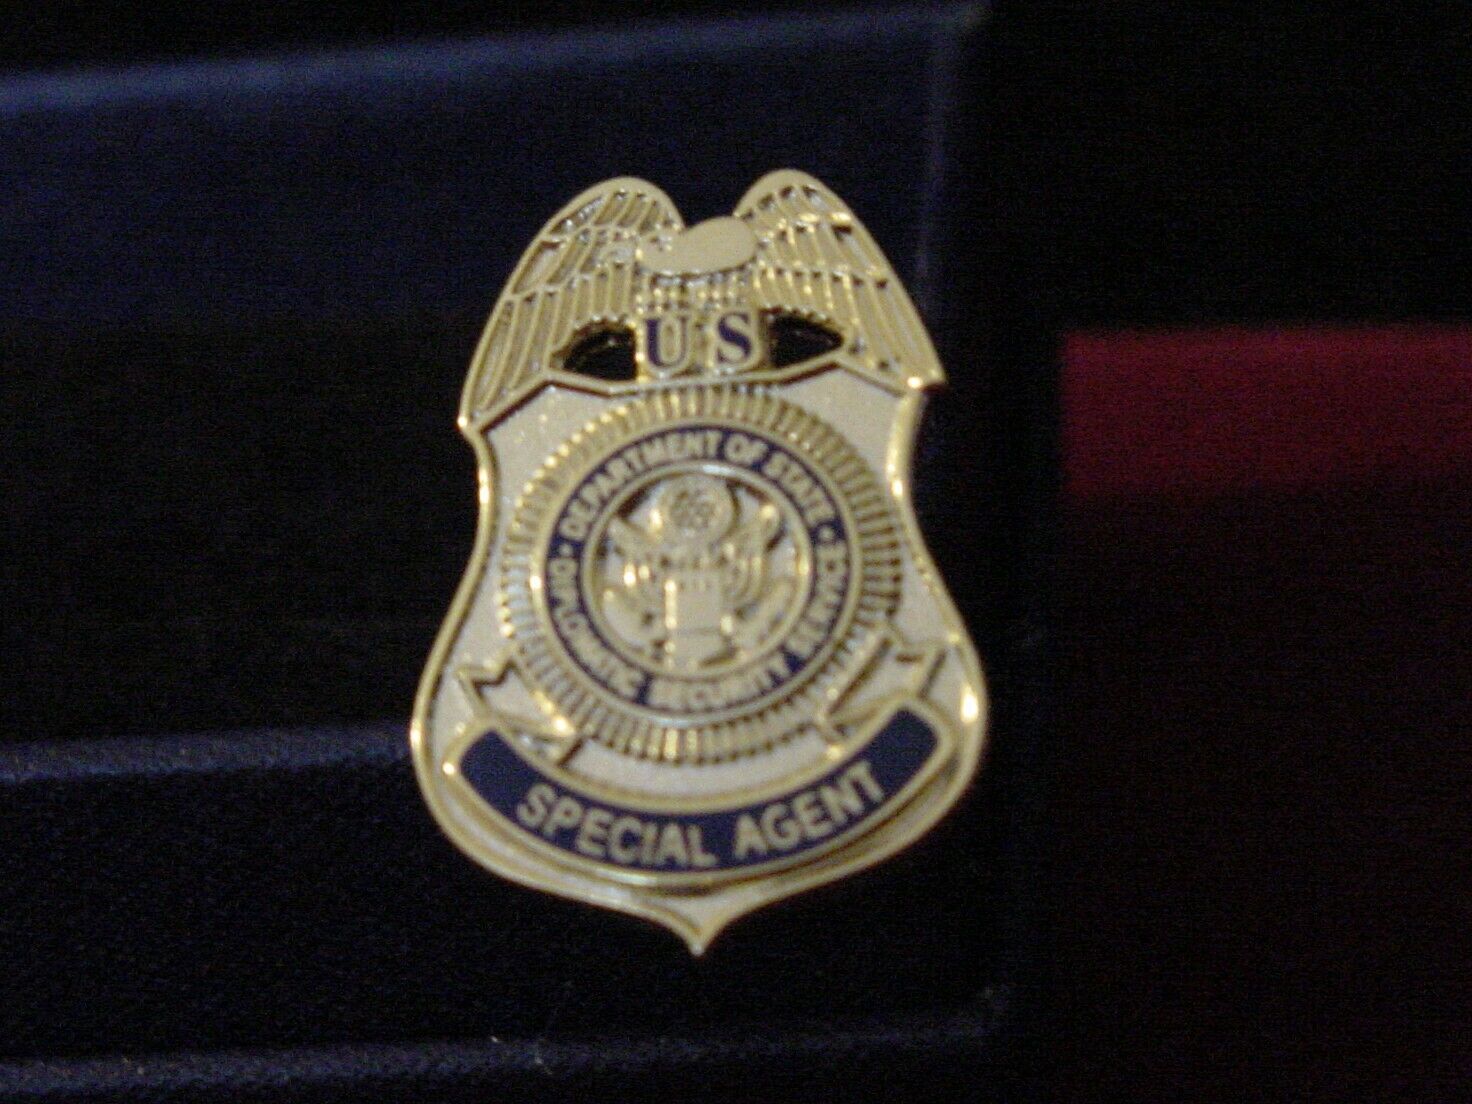 US state department diplomatic security services Lapel Pin - Special Agent